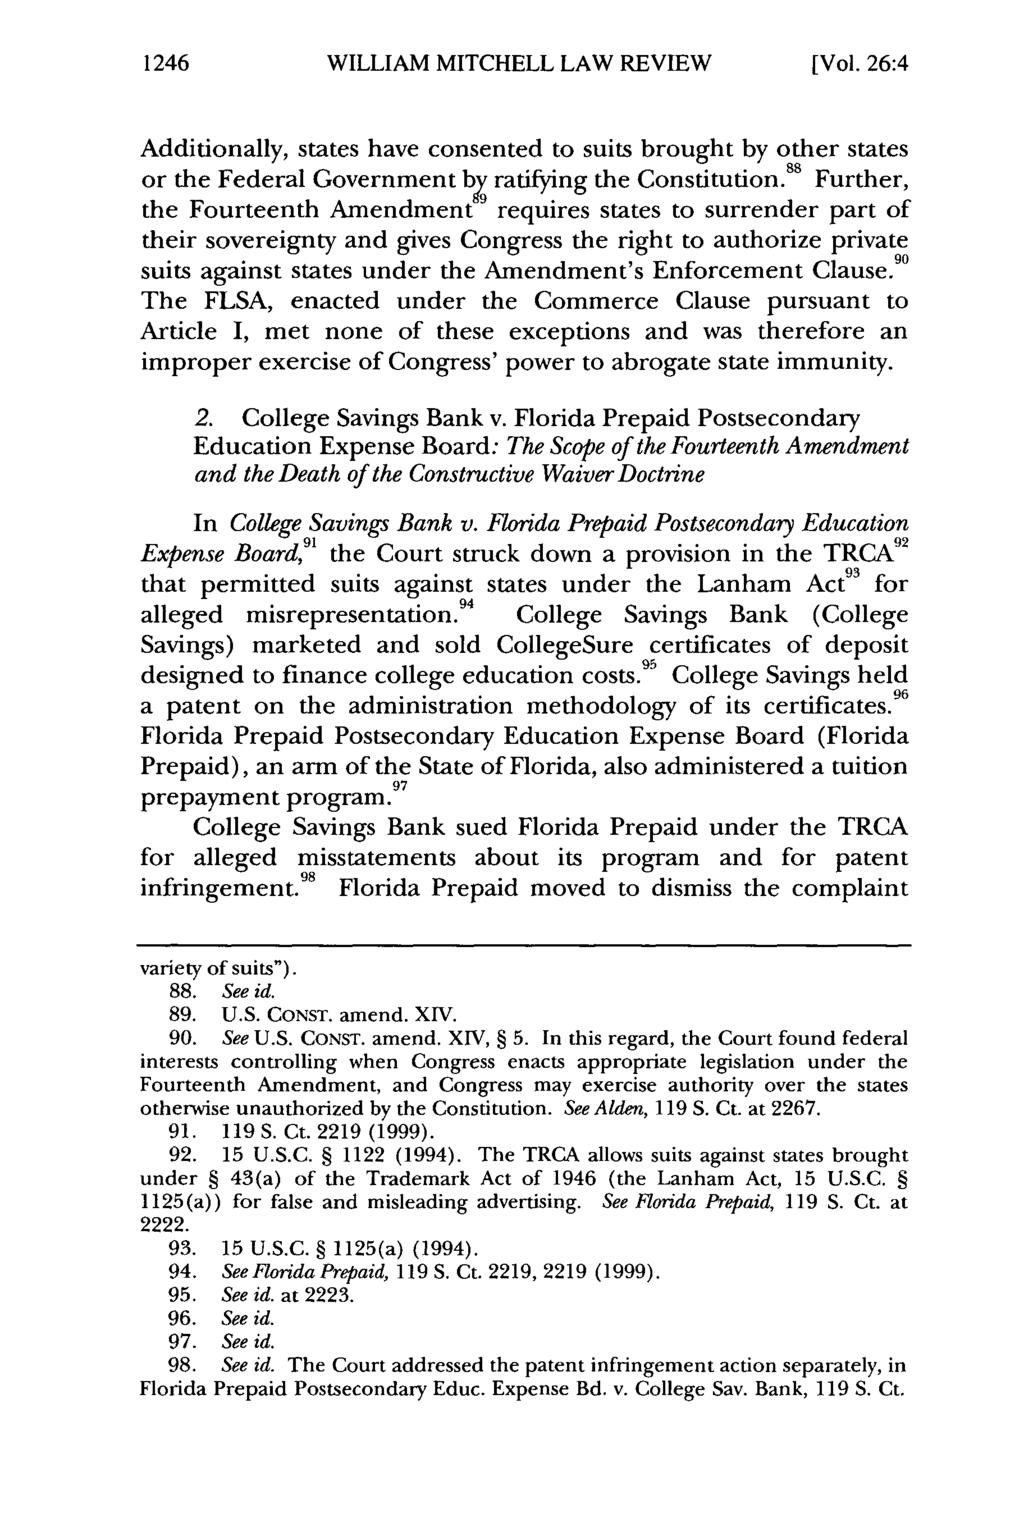 1246 William WILLIAM Mitchell Law MITCHELL Review, Vol. 26, LAW Iss. 4 [2000], REVIEW Art. 12 [Vol.